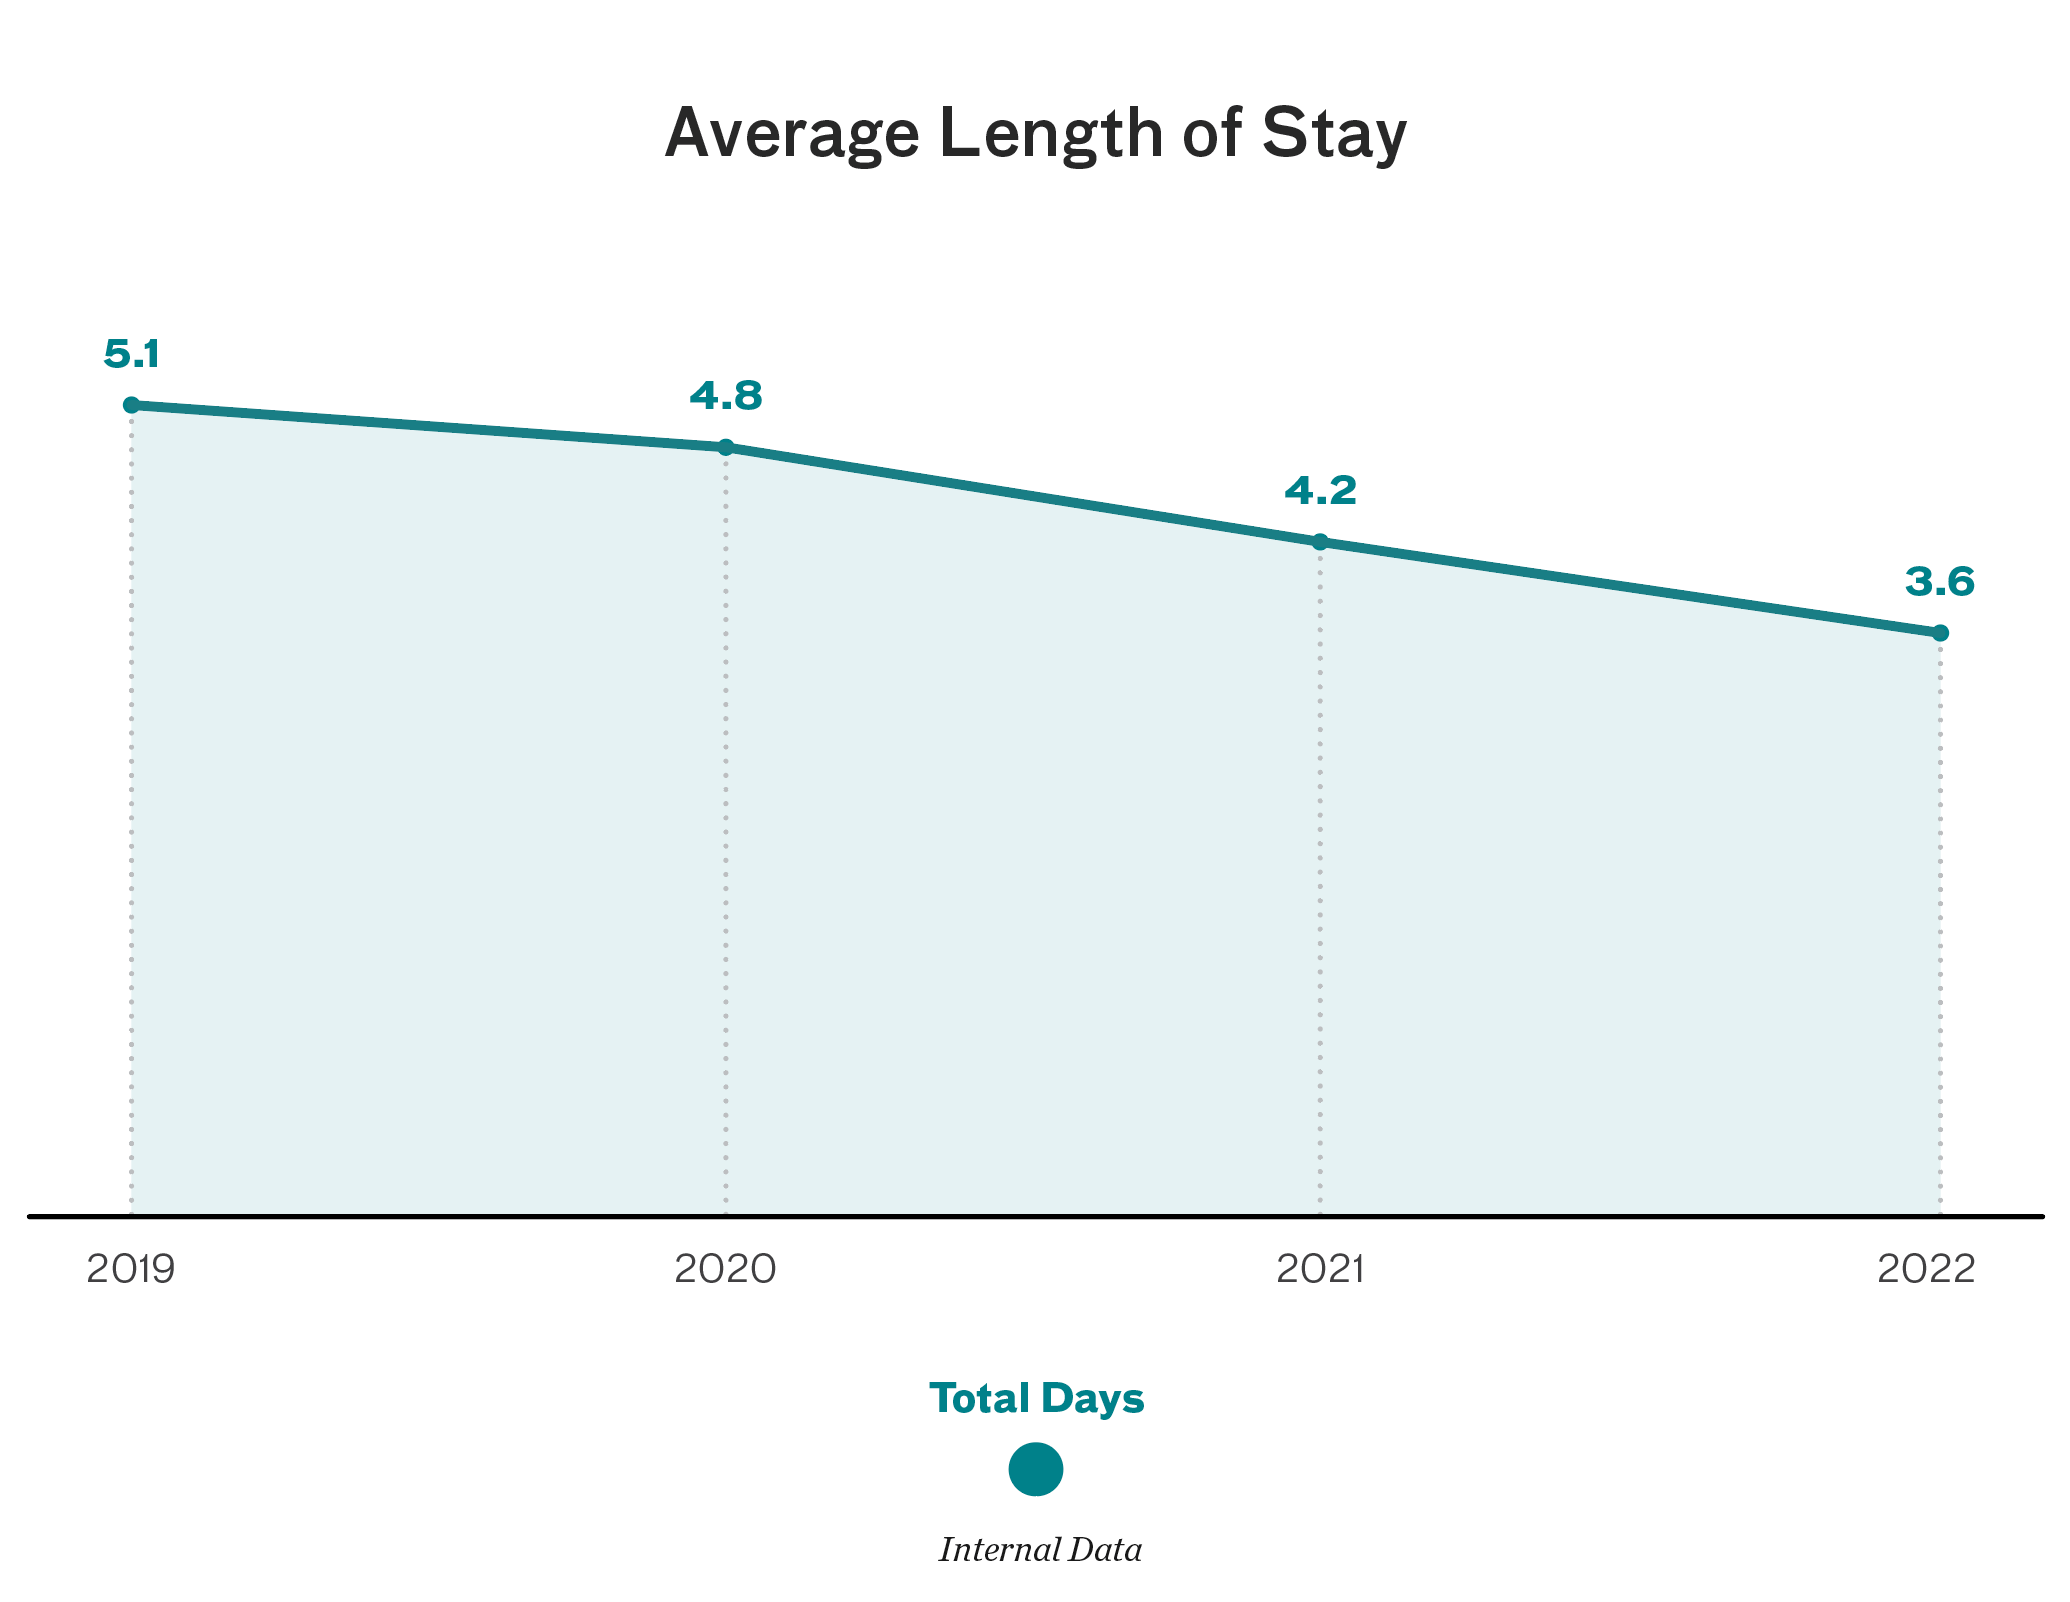 Chart showing average length of stay decreasing over time.